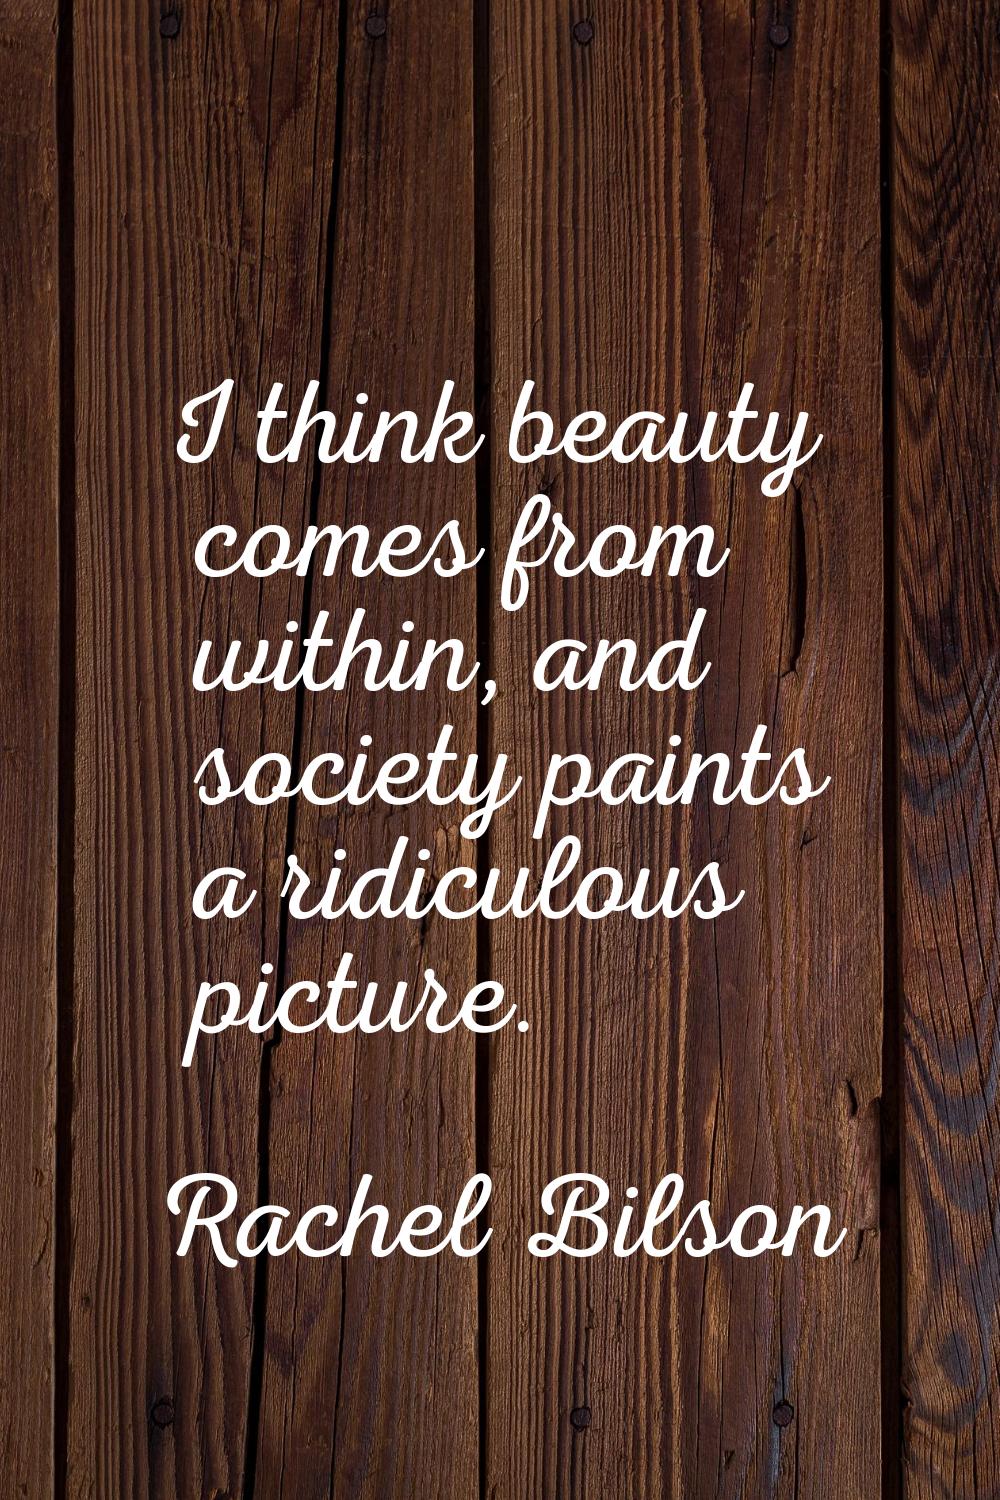 I think beauty comes from within, and society paints a ridiculous picture.